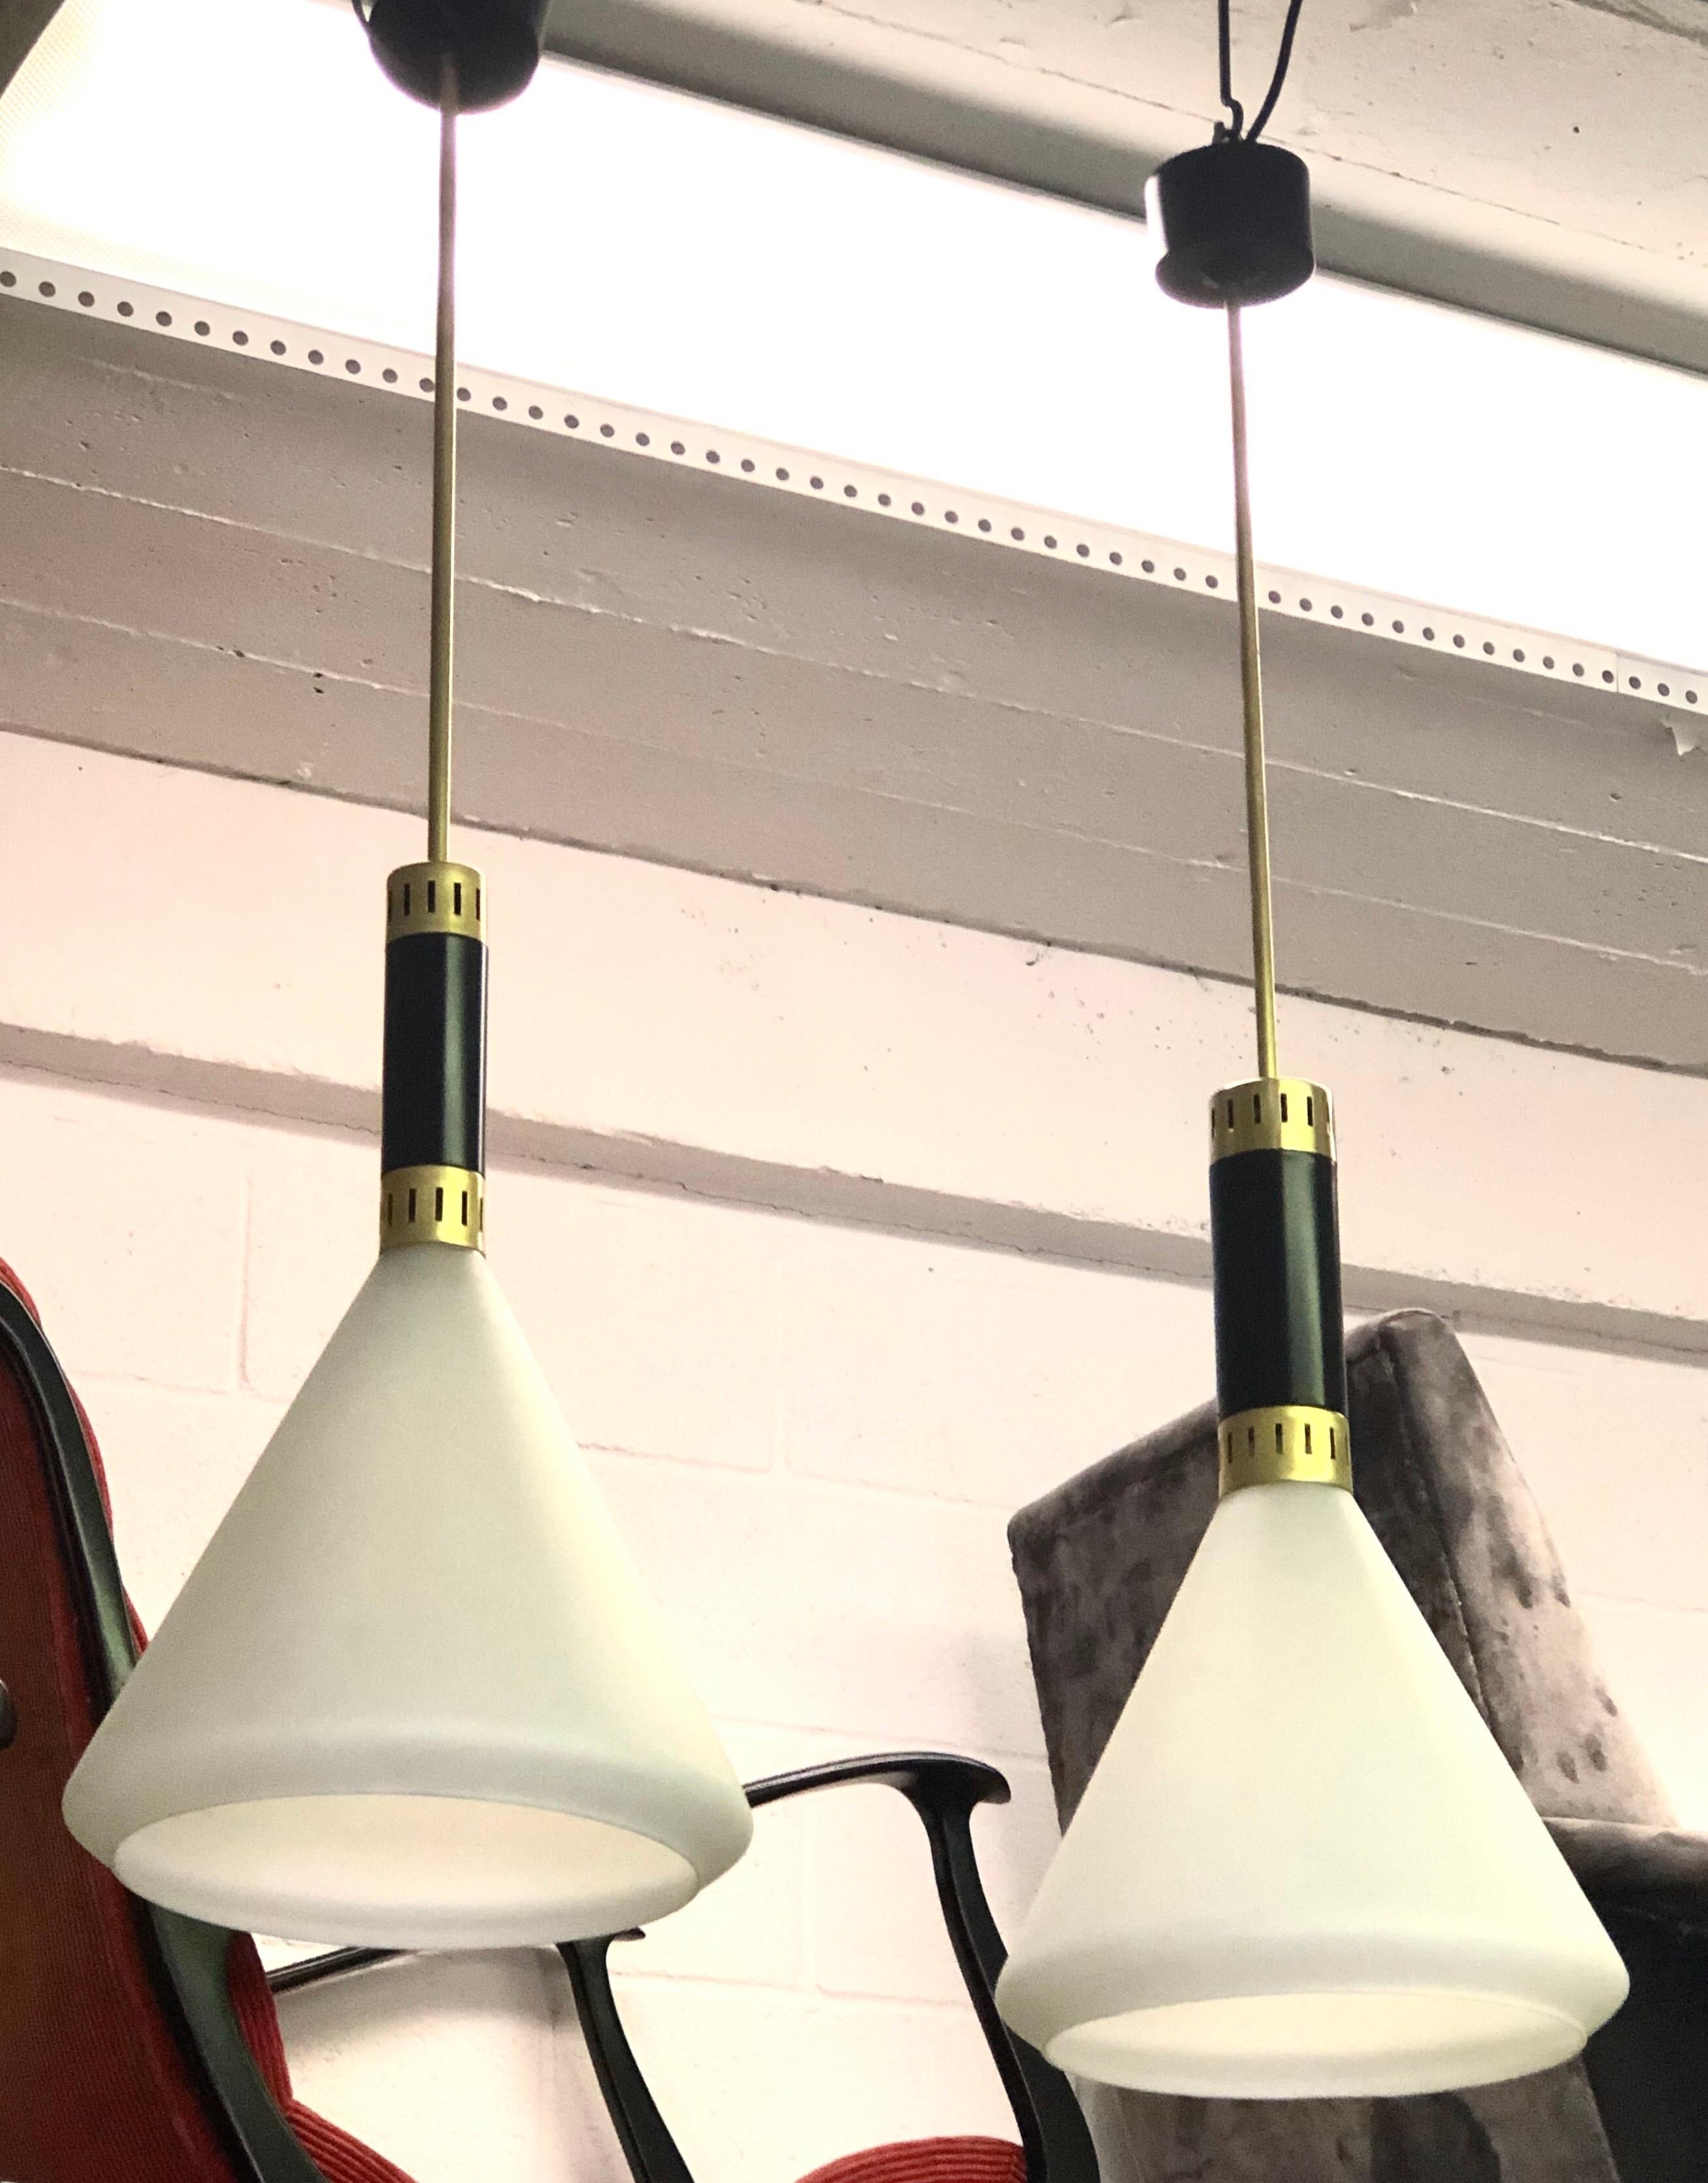 An Elegant Pair of Italian Mid-Century Modern pendants or chandeliers attributed Max Ingrand for Fontana Arte, circa 1958. The pieces are composed a black enameled metal and brass collar which supports a conical milk glass reflector which curves